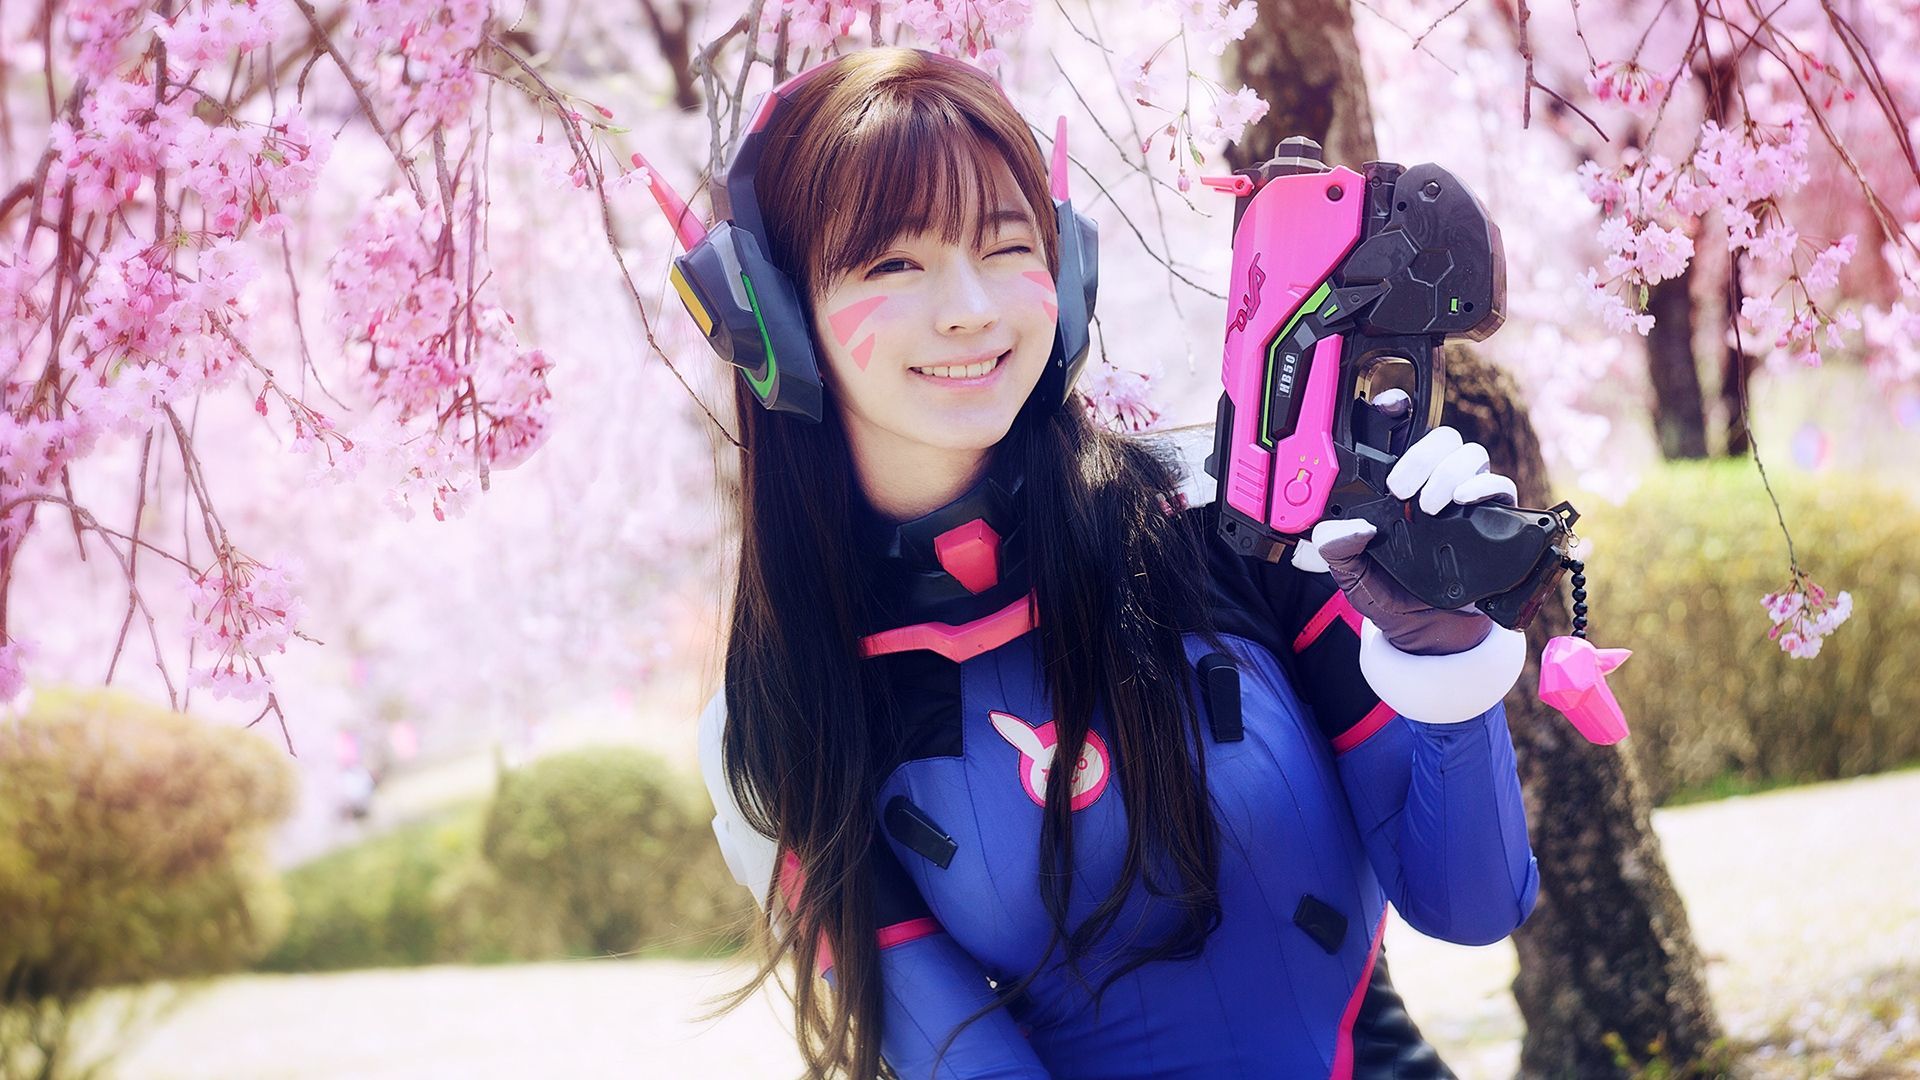 Awesome D.Va Beautiful Wink and Smile Overwatch Cosplay Cherry